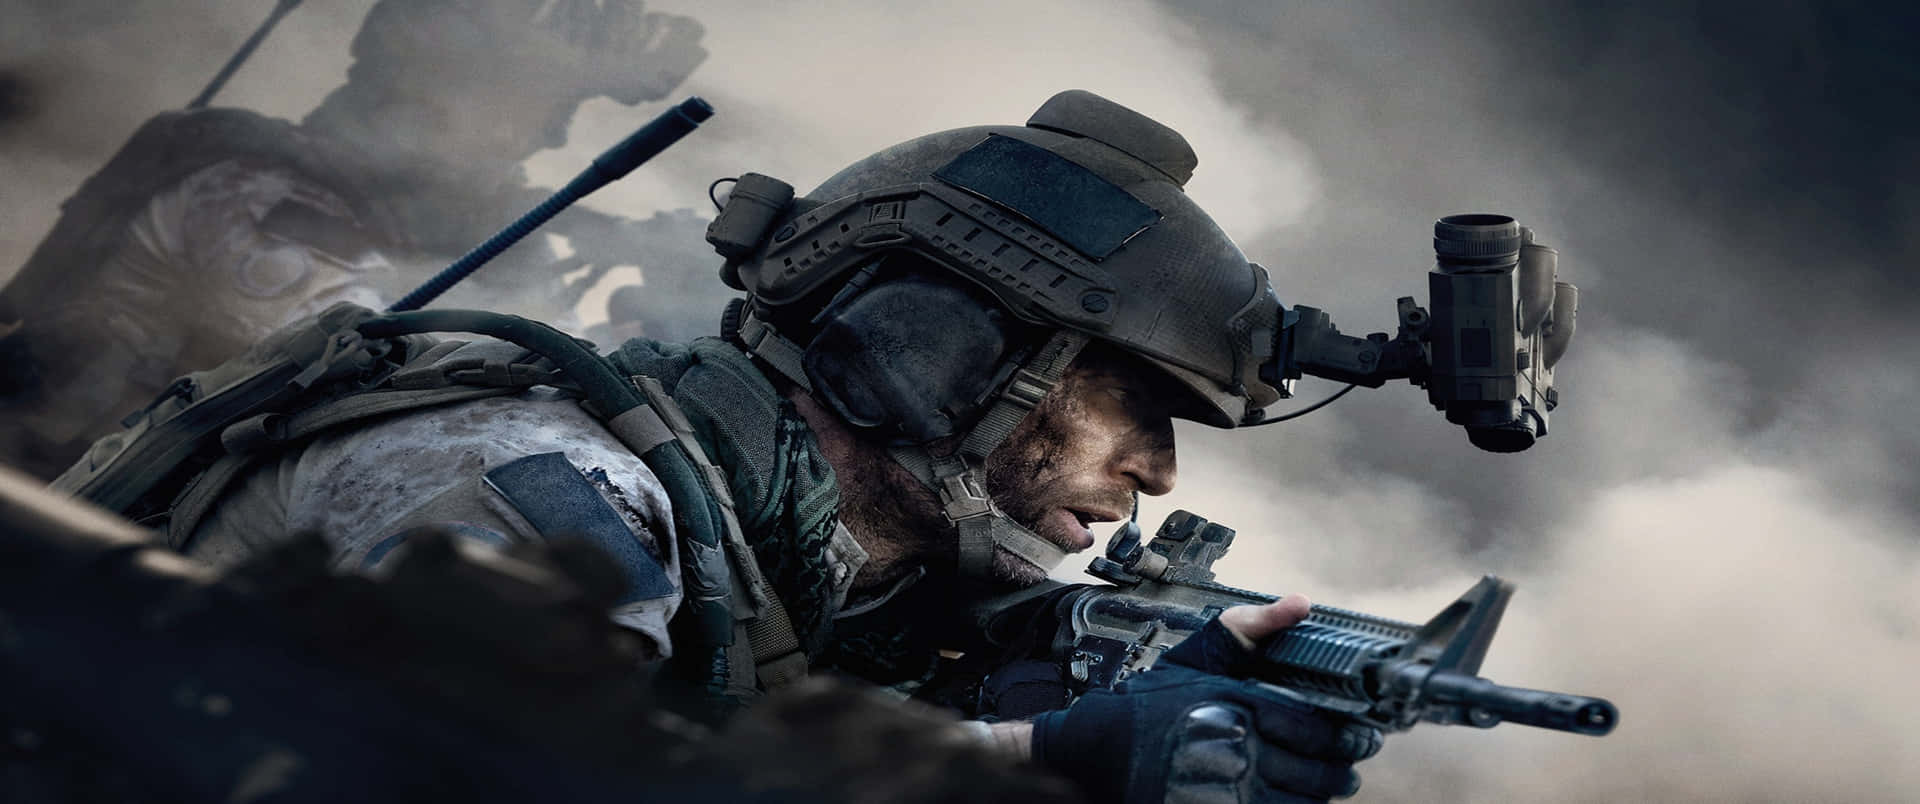 210+ Call Of Duty HD Wallpapers and Backgrounds